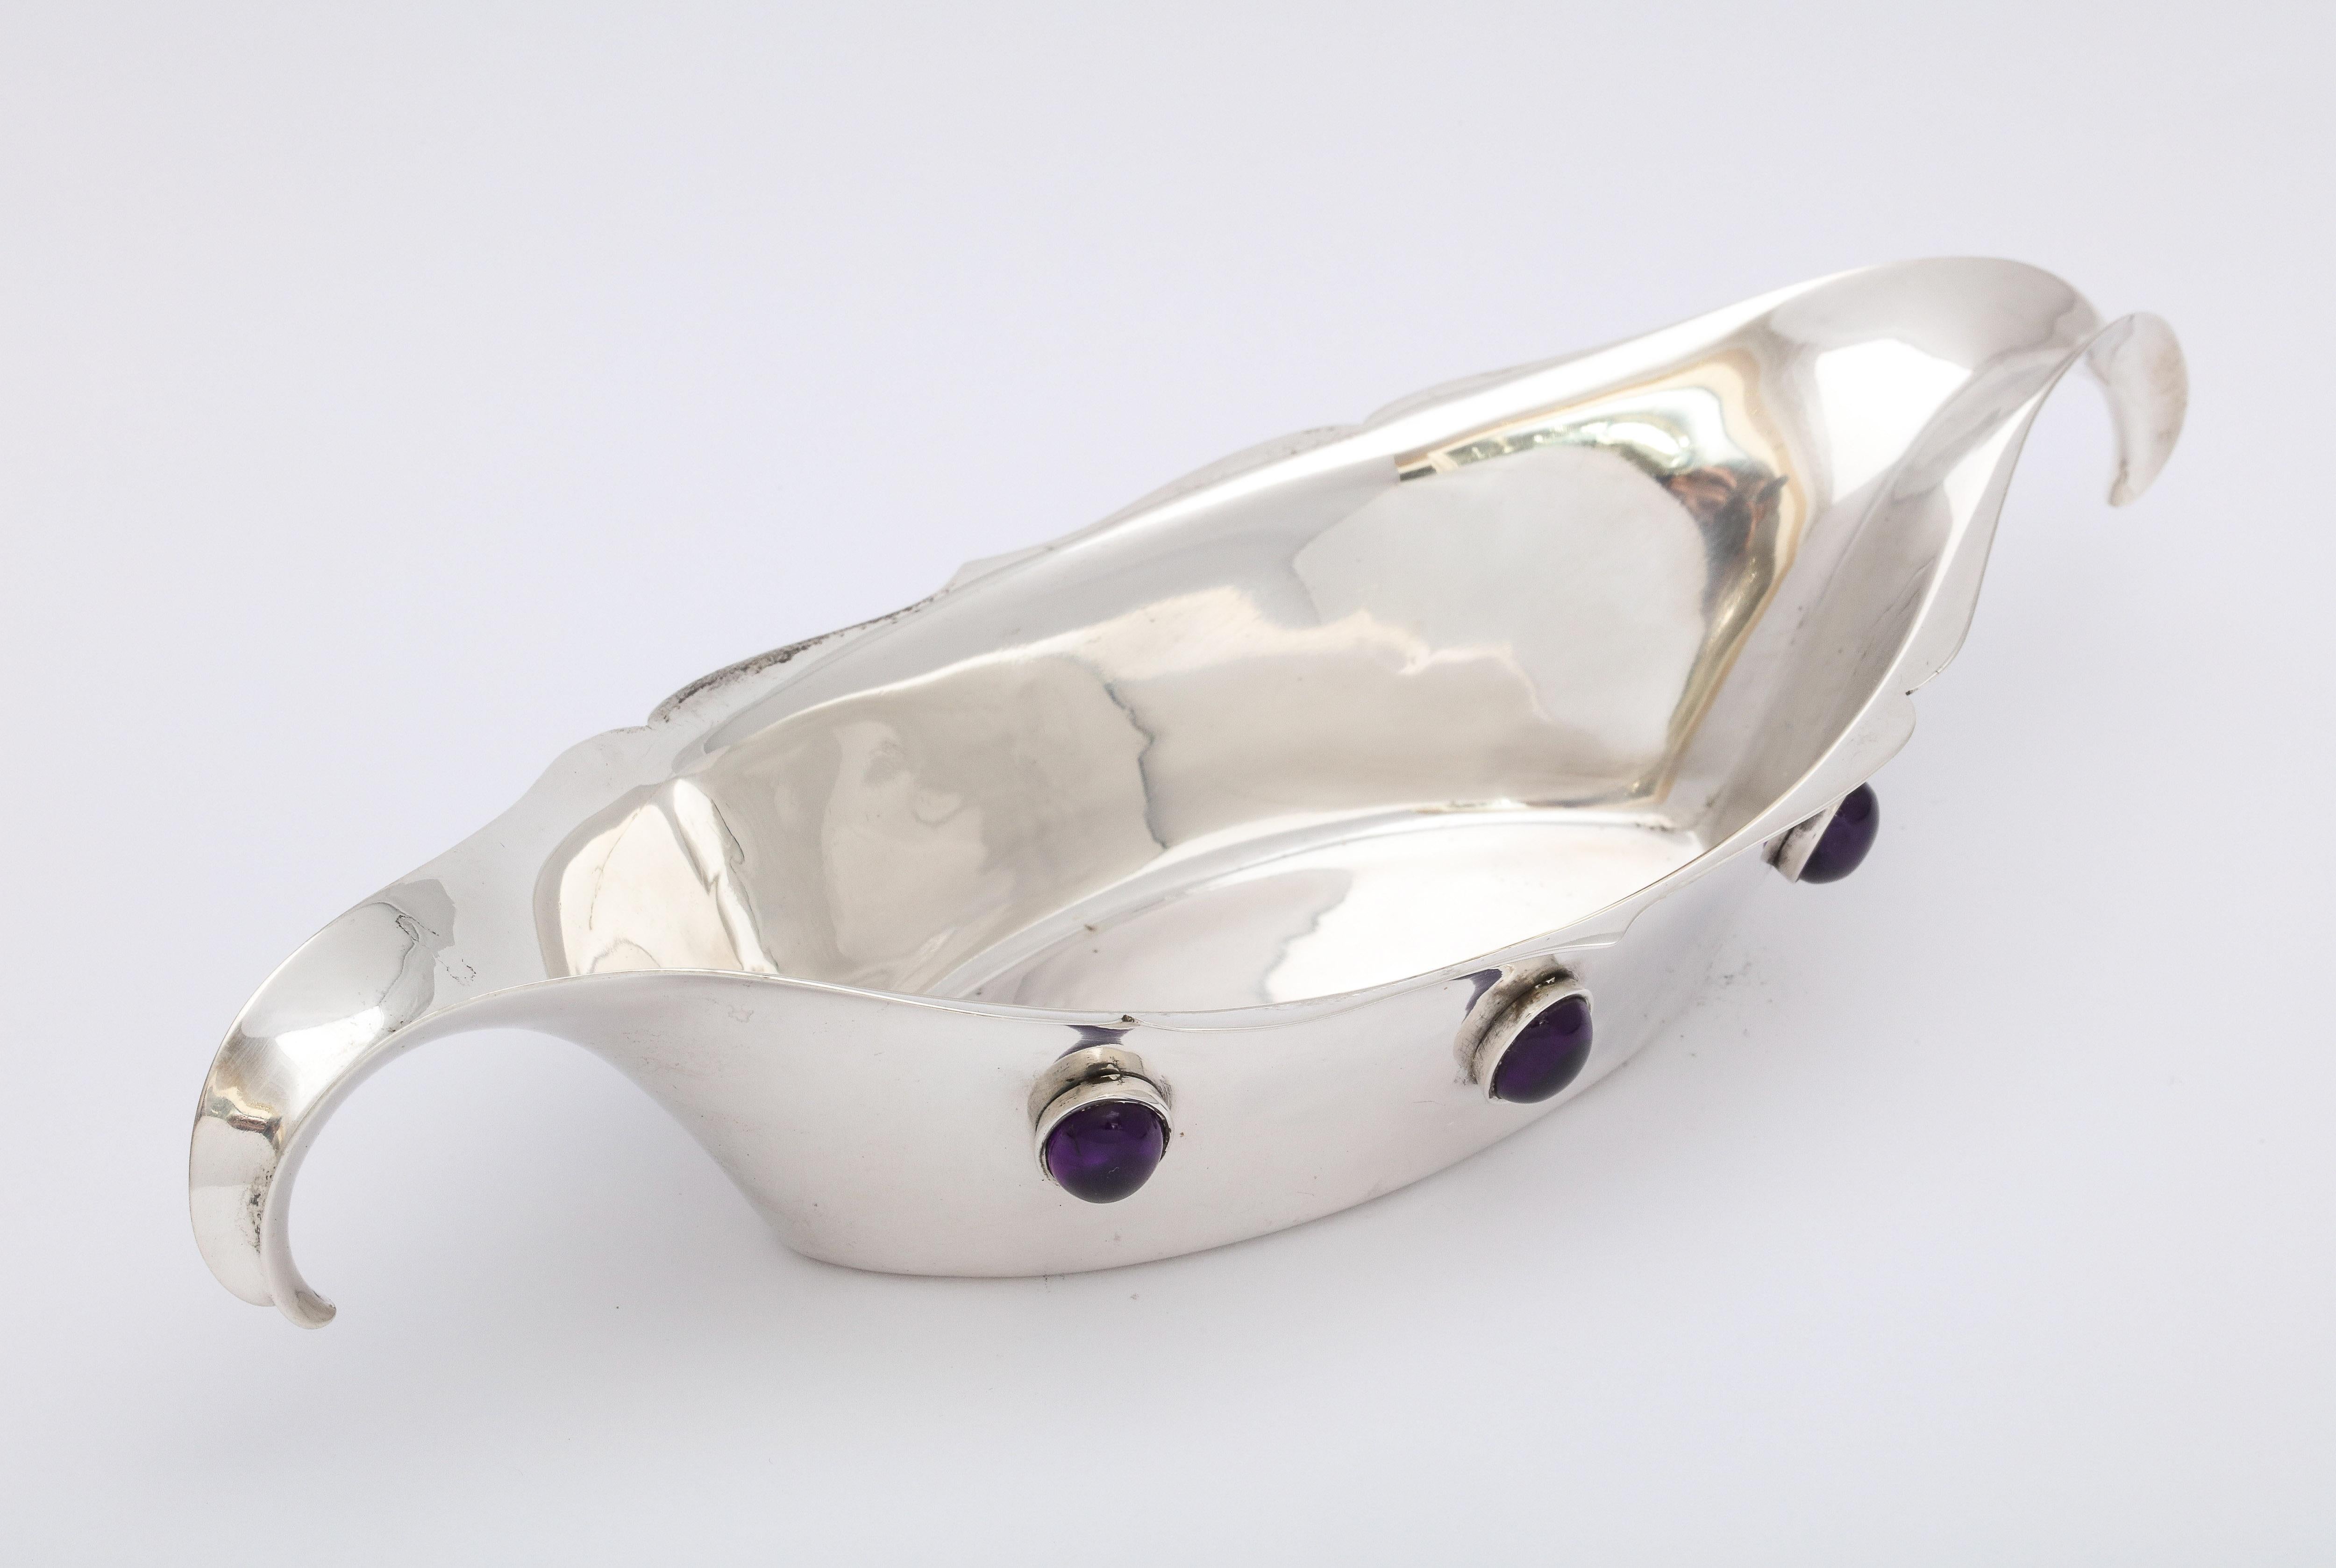 Arts & Crafts, sterling silver bowl inset with cabochon cut, bezel set amethysts, The Watson Silver Co., Attleboro, Mass., circa 1920s. Graceful curve to handles. Lovely design. Measures: 8 3/4 inches wide x 3 1/4 inches deep x 1 3/4 inches high at